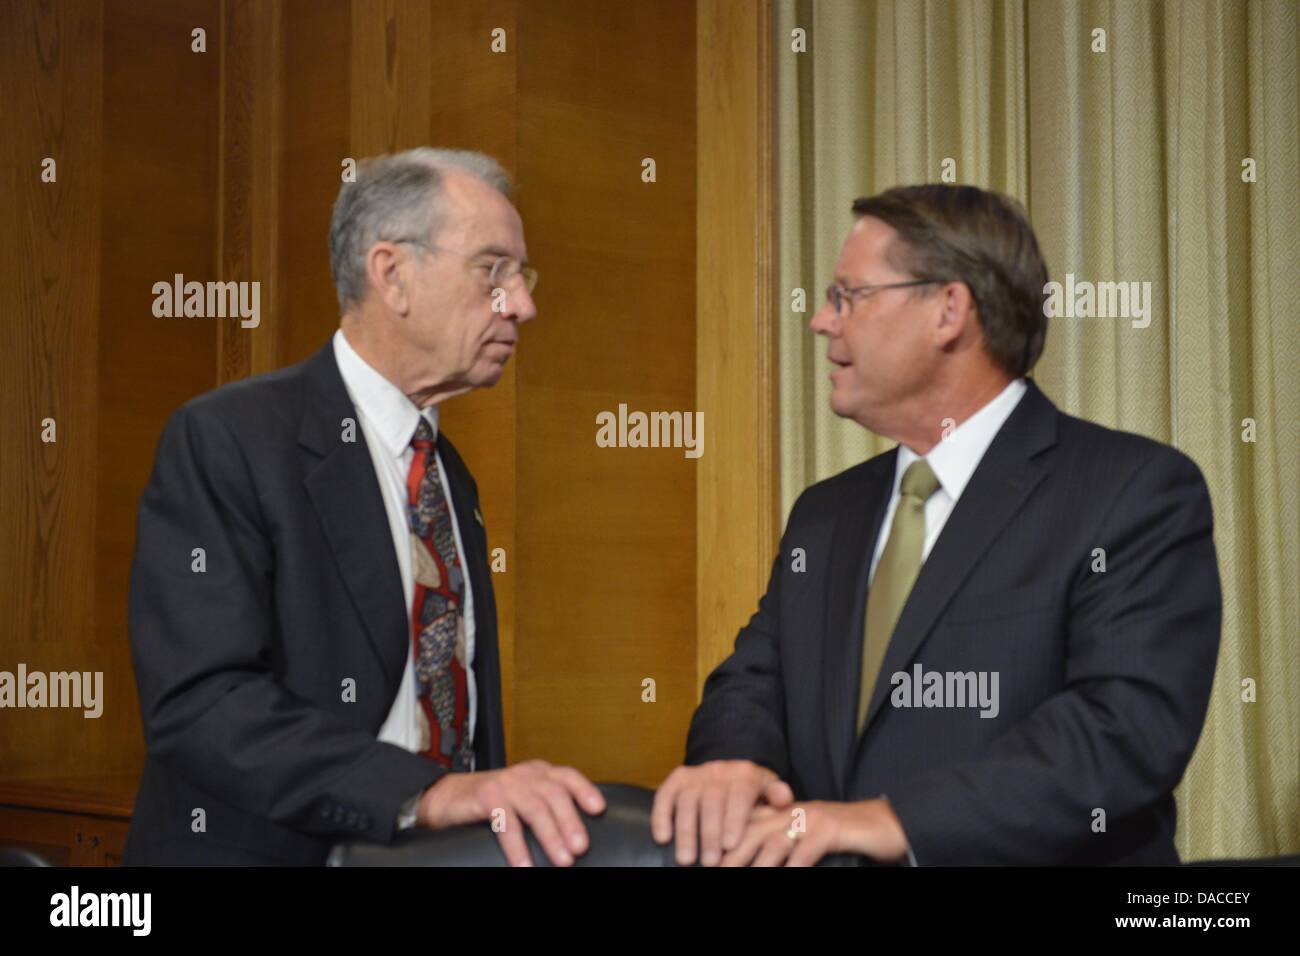 Washington, DC, USA. 10th July, 2013. Sen. CHUCK GRASSLEY, D-IA, left, speaks with LARRY POPE, president and CEO of pork producer Smithfield Foods, Inc. before a heairng of the U.S. Senate Agriculture Committee on the proposed takeover of Smithfield by Shuanghui International, a Chinese company. © Jay Mallin/ZUMAPRESS.com/Alamy Live News Stock Photo